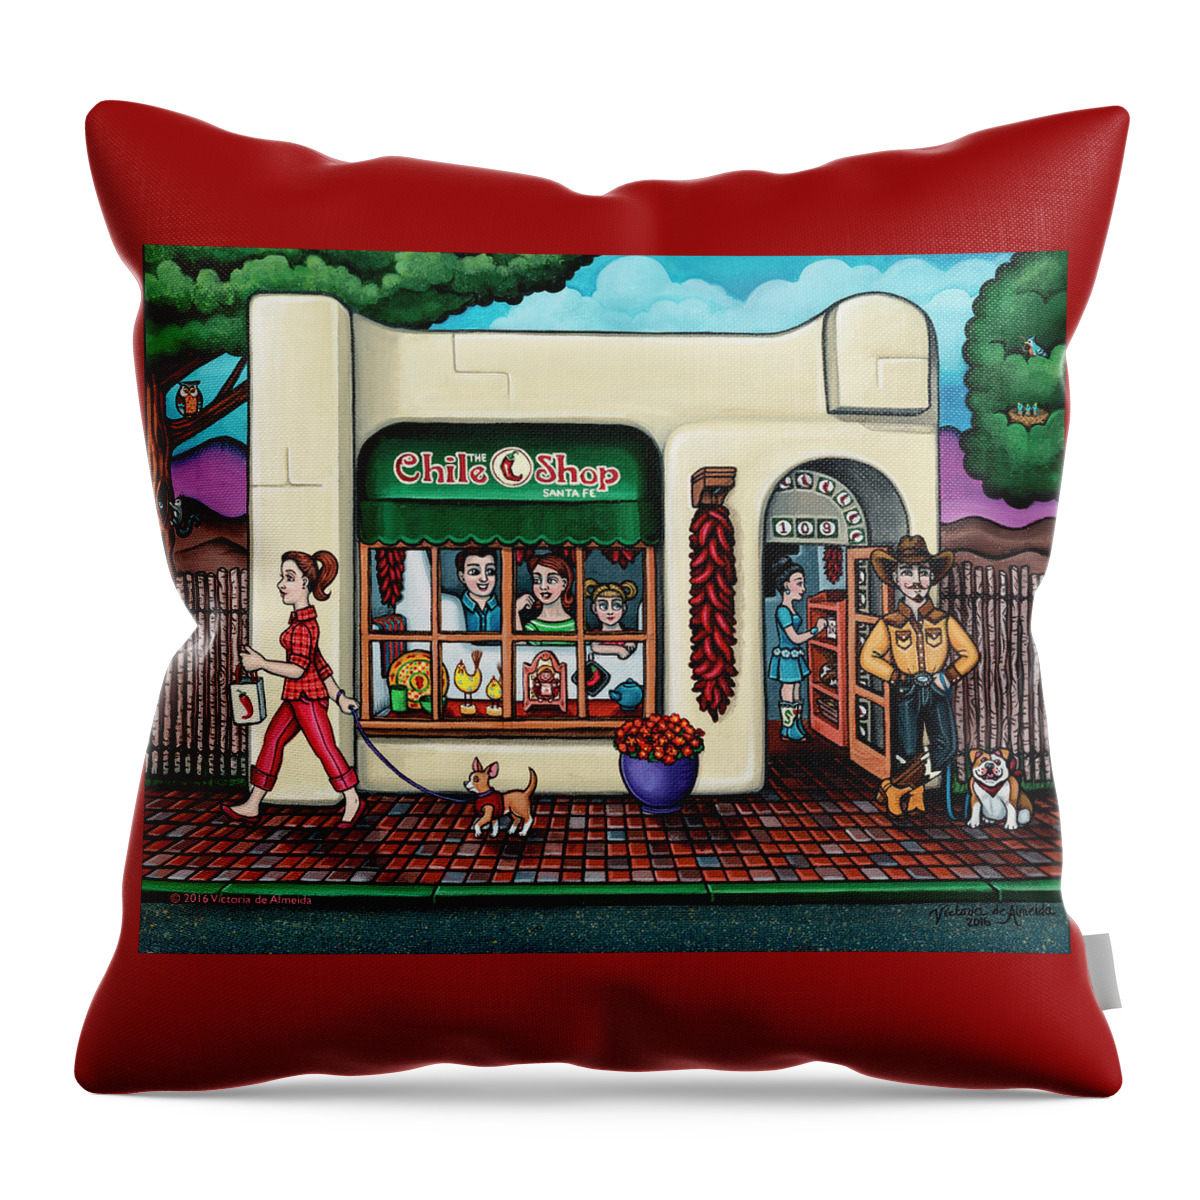 Chile Shop Throw Pillow featuring the painting The Chile Shop Santa Fe by Victoria De Almeida